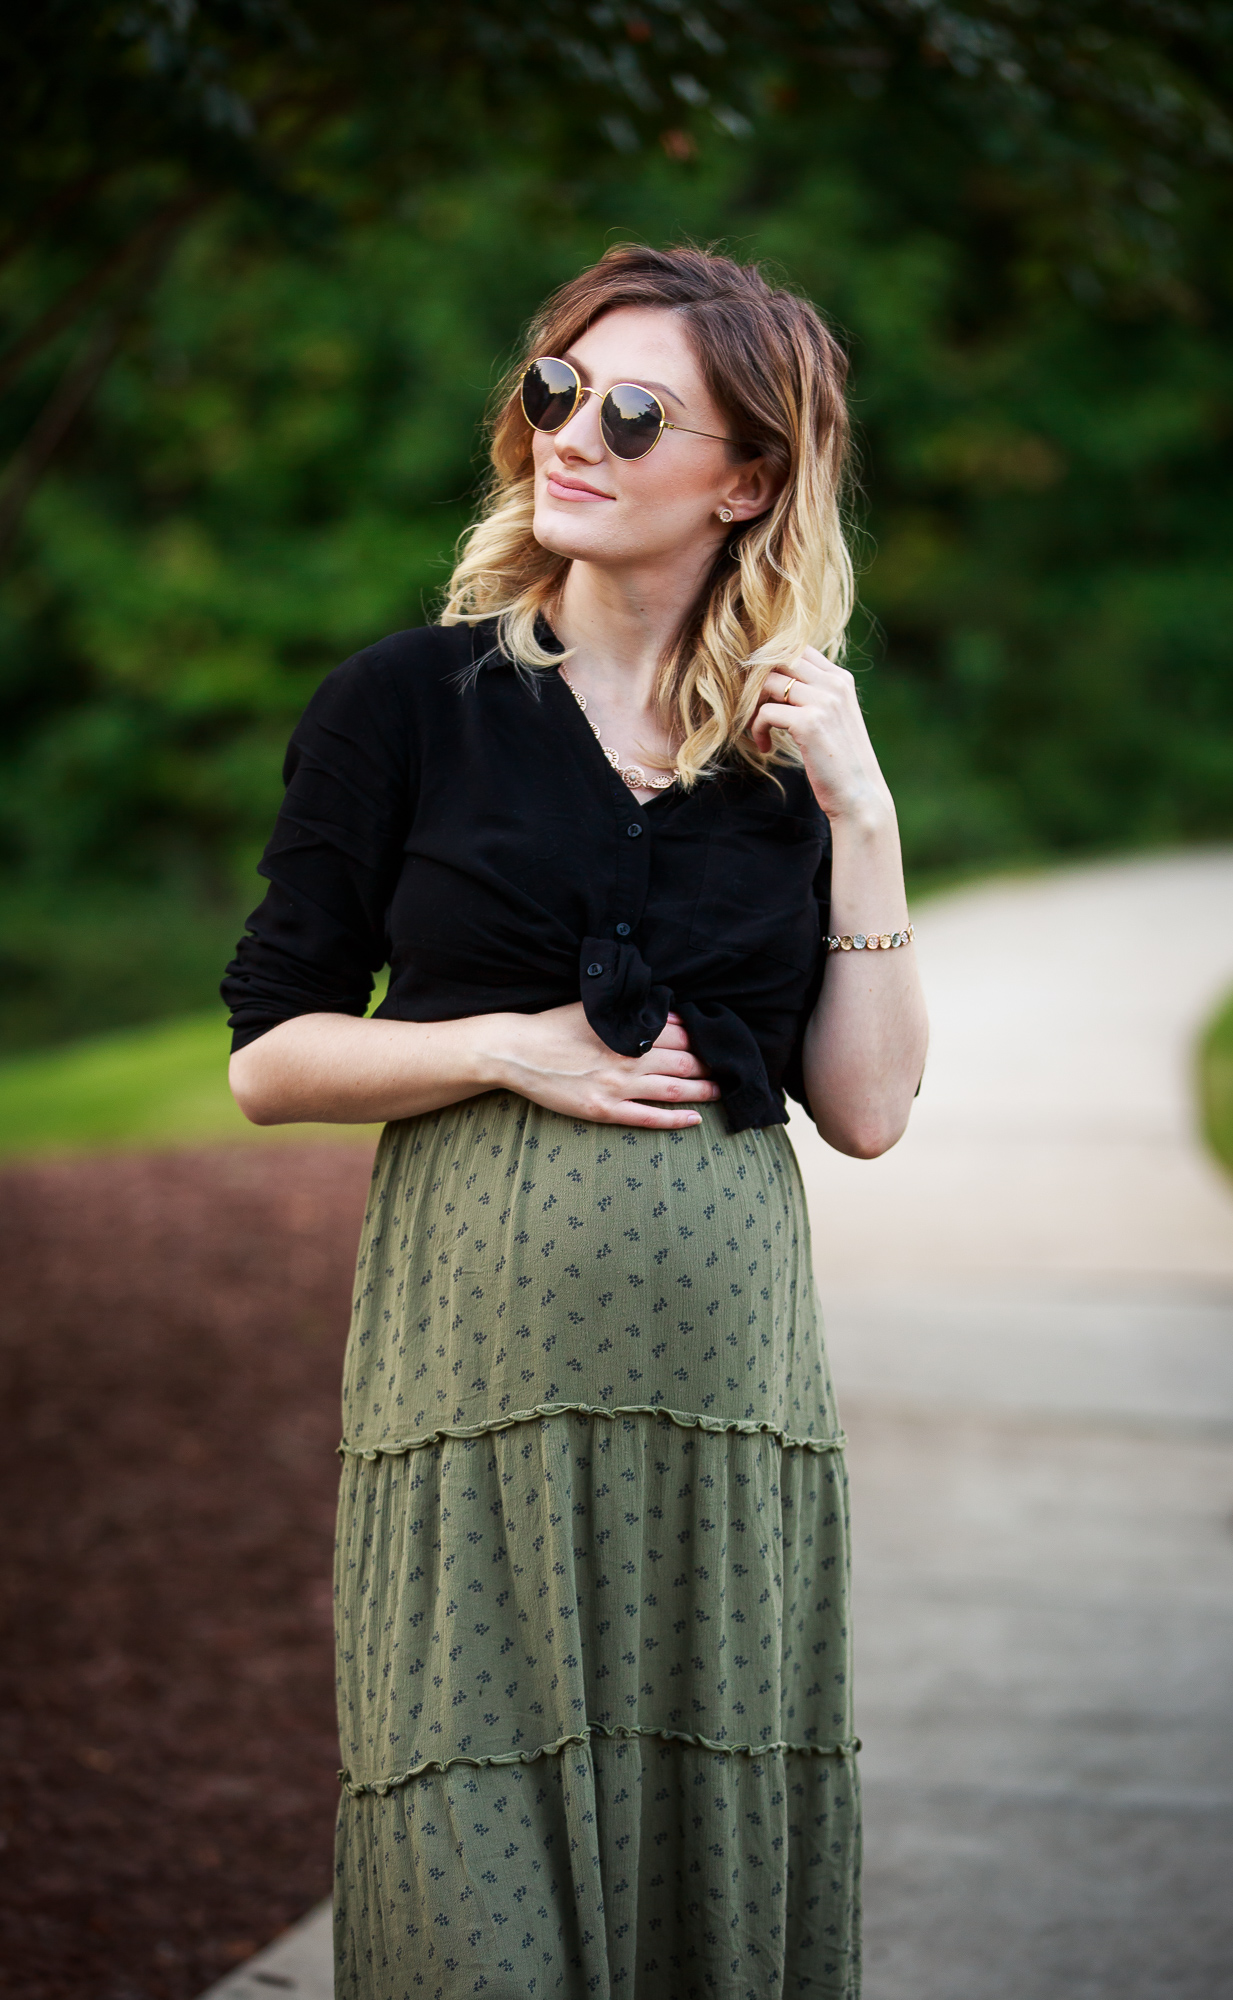 Maternity Style outfit inspiration by North Carolina fashion and lifestyle blogger Jessica Linn from Linn Style. Olive green maxi dress from Target, black button up blouse from Forever21, Necklace from Francesca's, and Tory Burch sandals